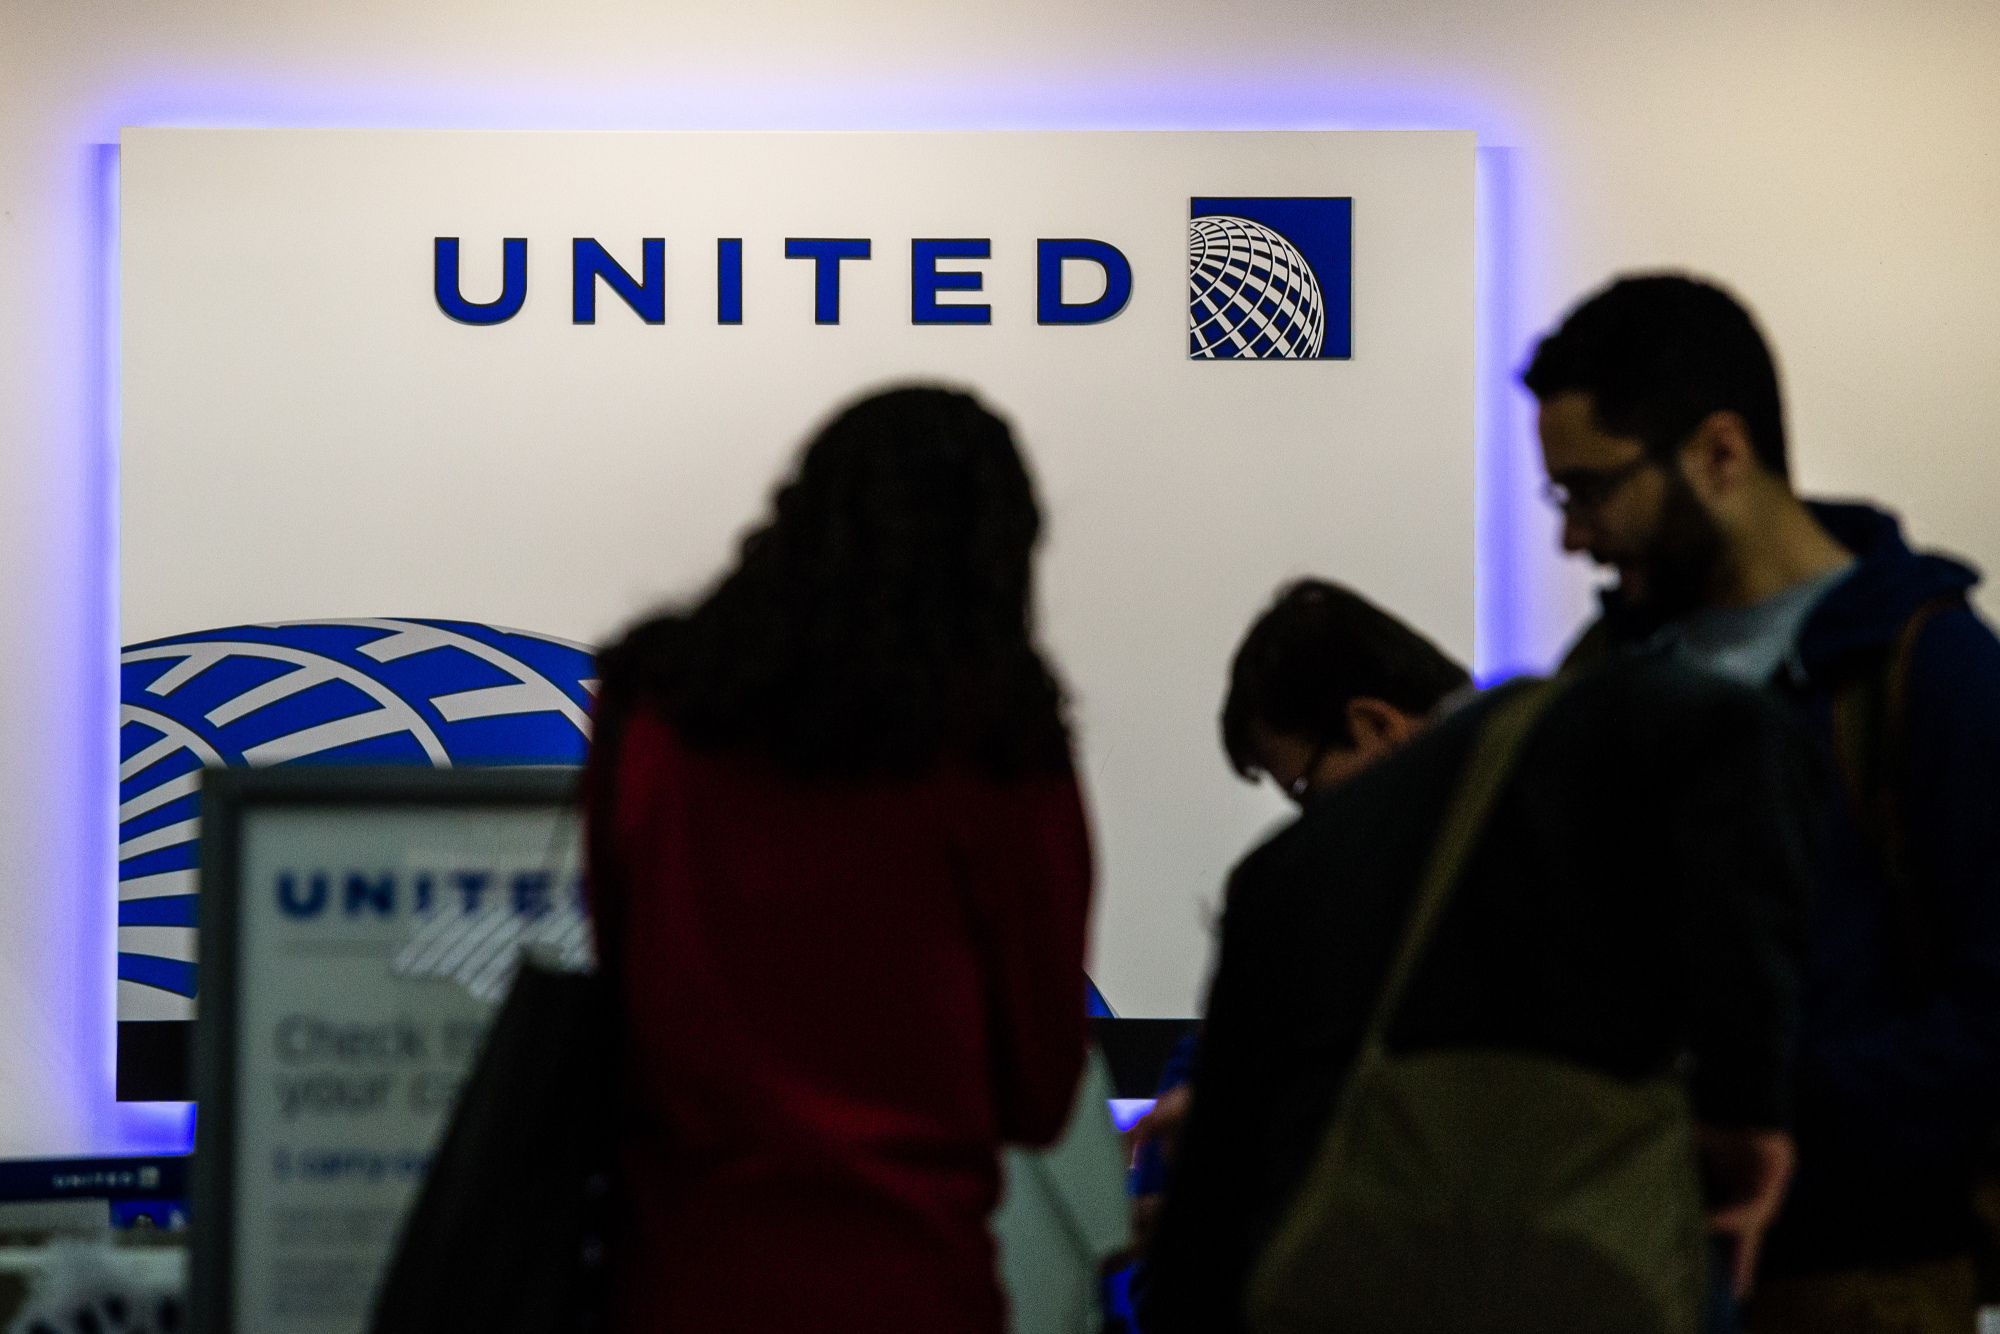 Passengers use self check-in kiosks inside the United Continental Holdings Inc. terminal.